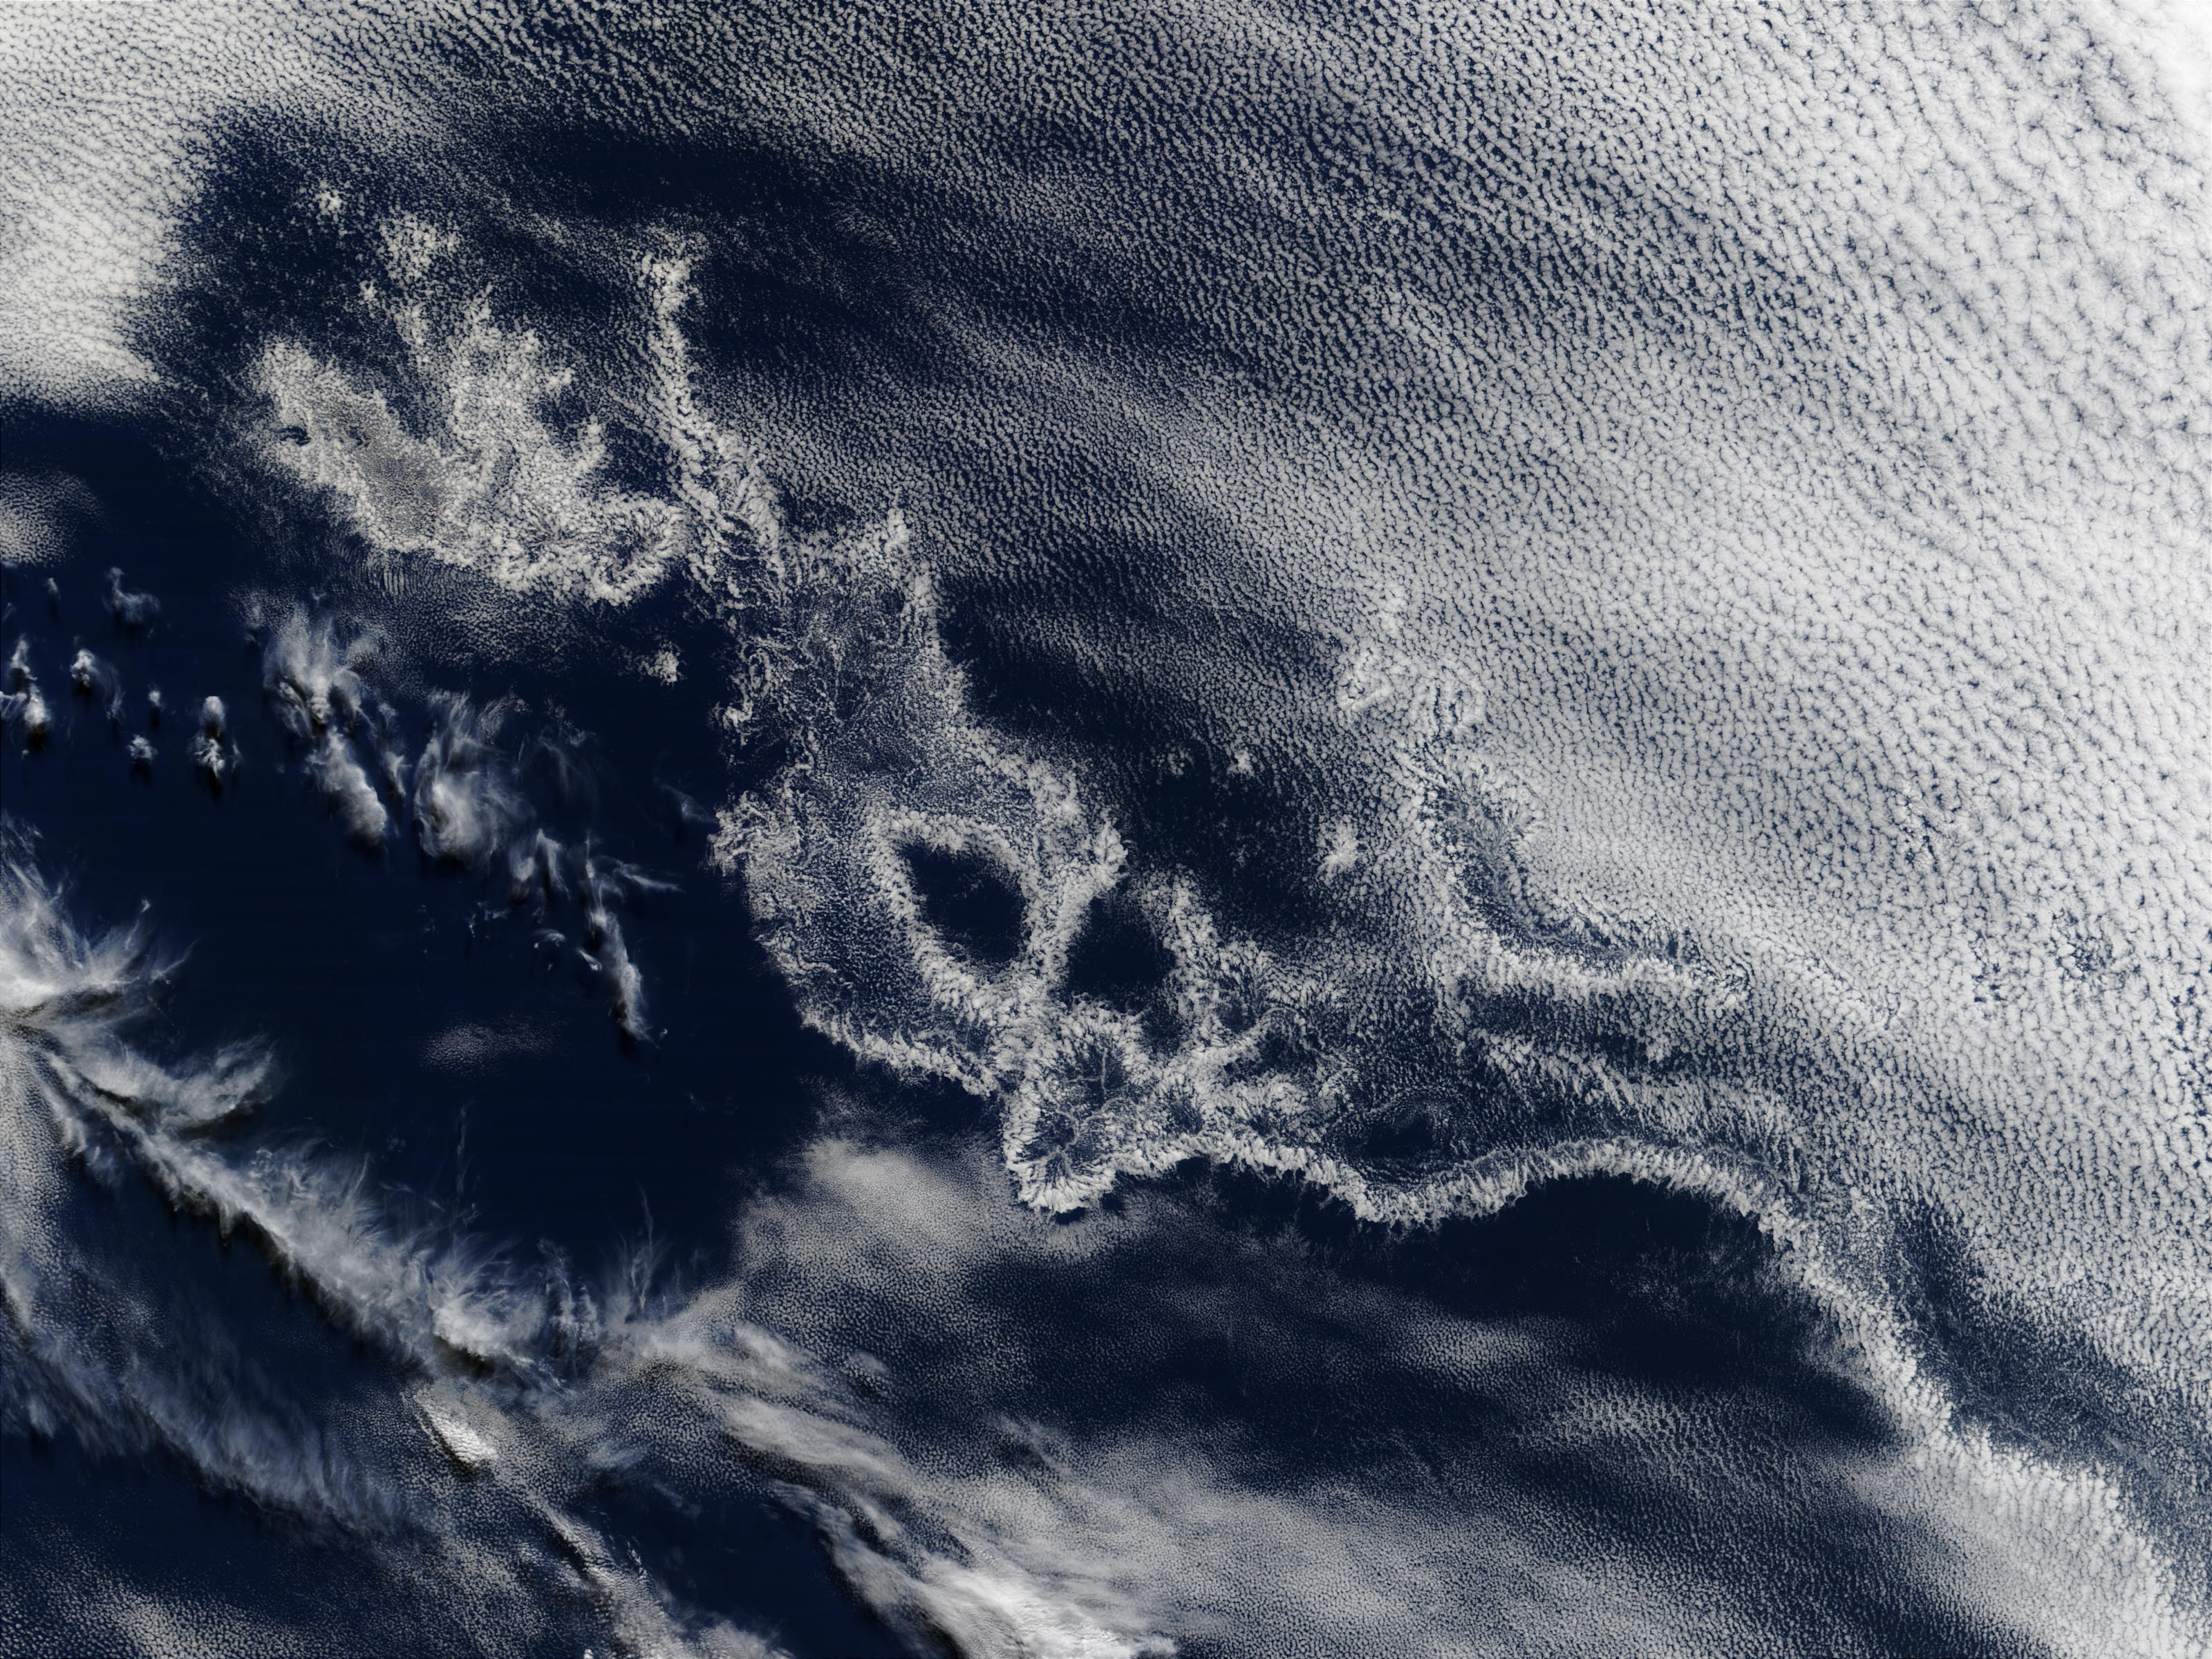 Ship tracks off Chile, South Pacific Ocean - related image preview